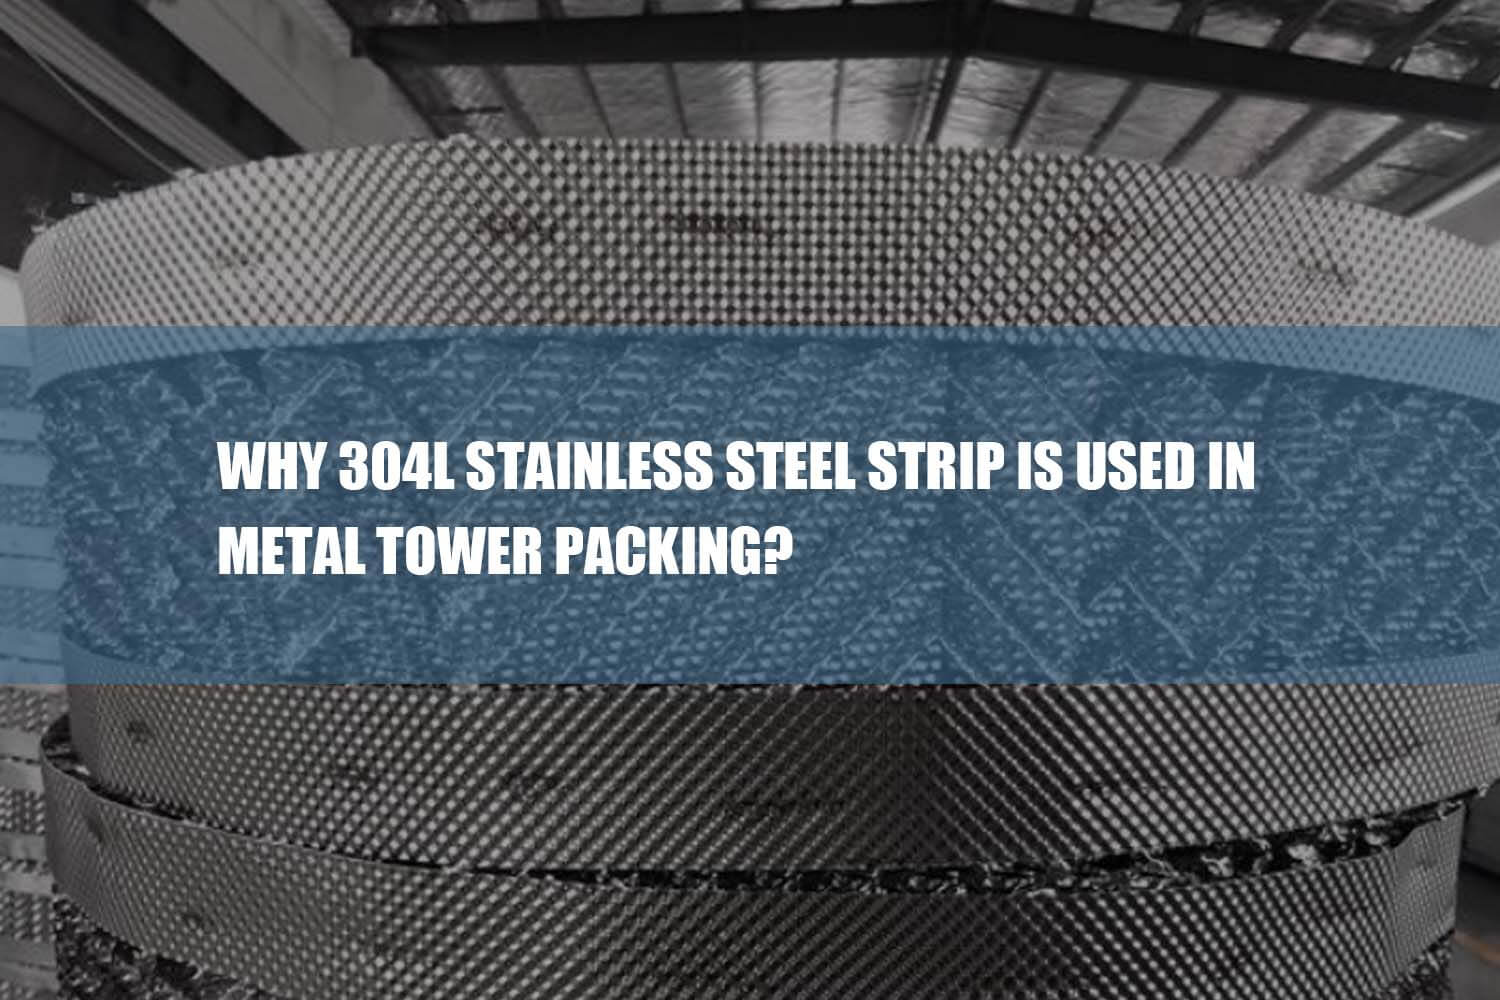 304l stainless steel strip is used in metal tower packing